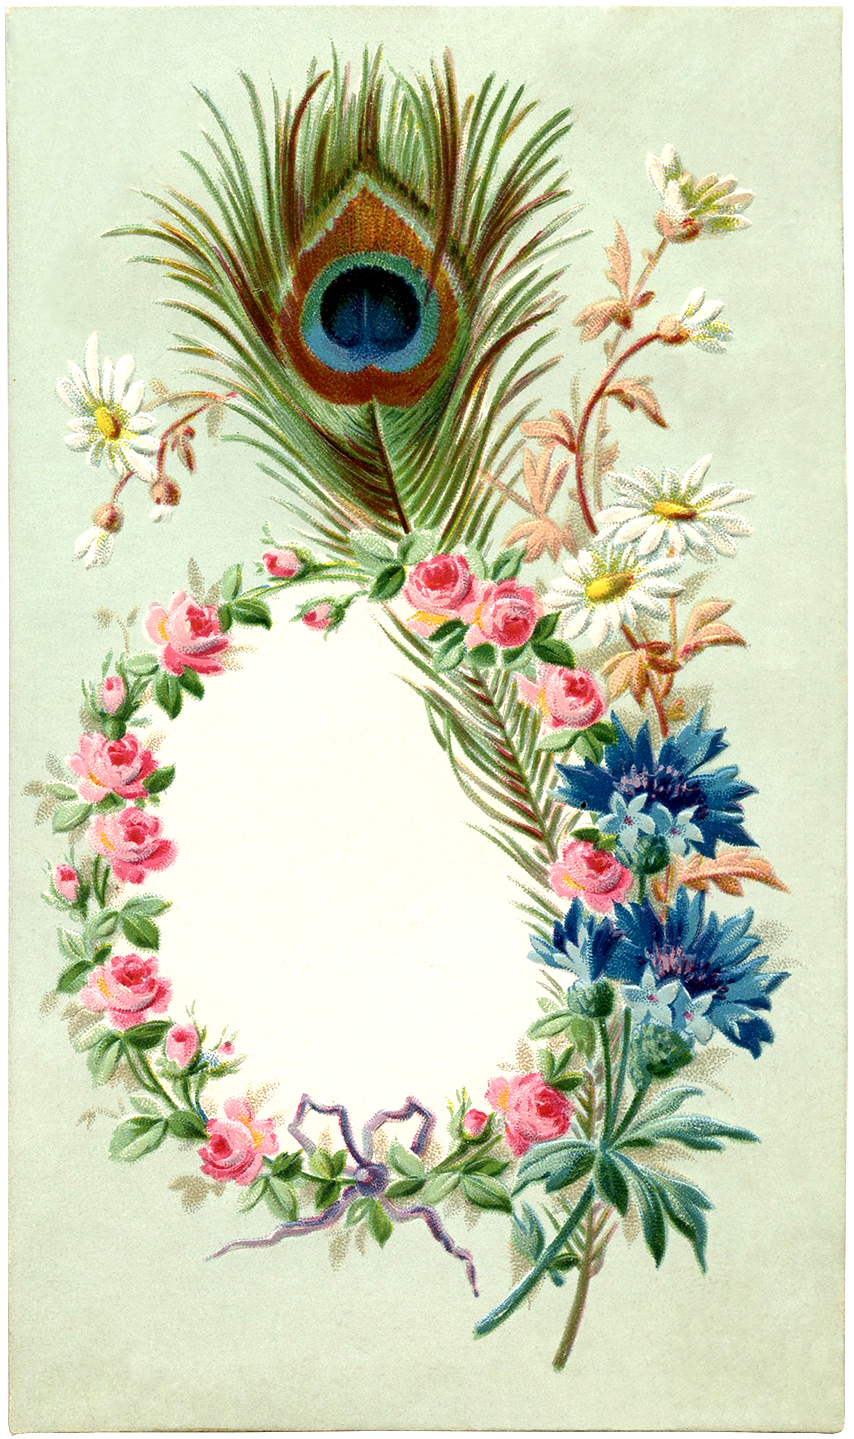 Vintage Peacock Feather Frame Image - The Graphics Fairy